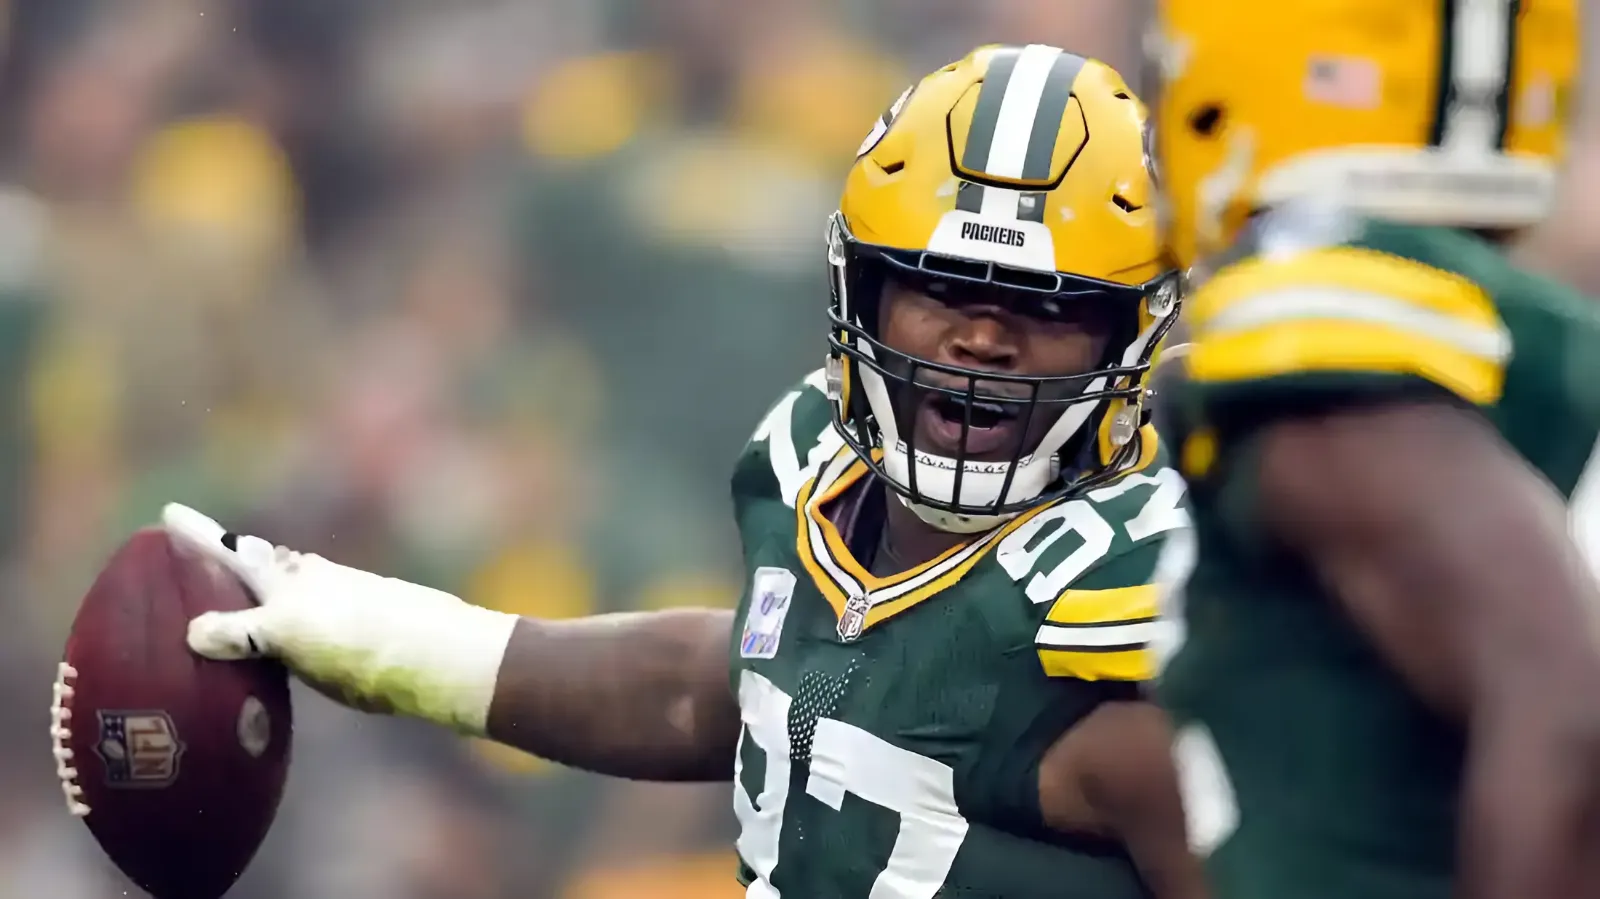 BREAKING: Packers $70 Million Star Named Top Trade Candidate